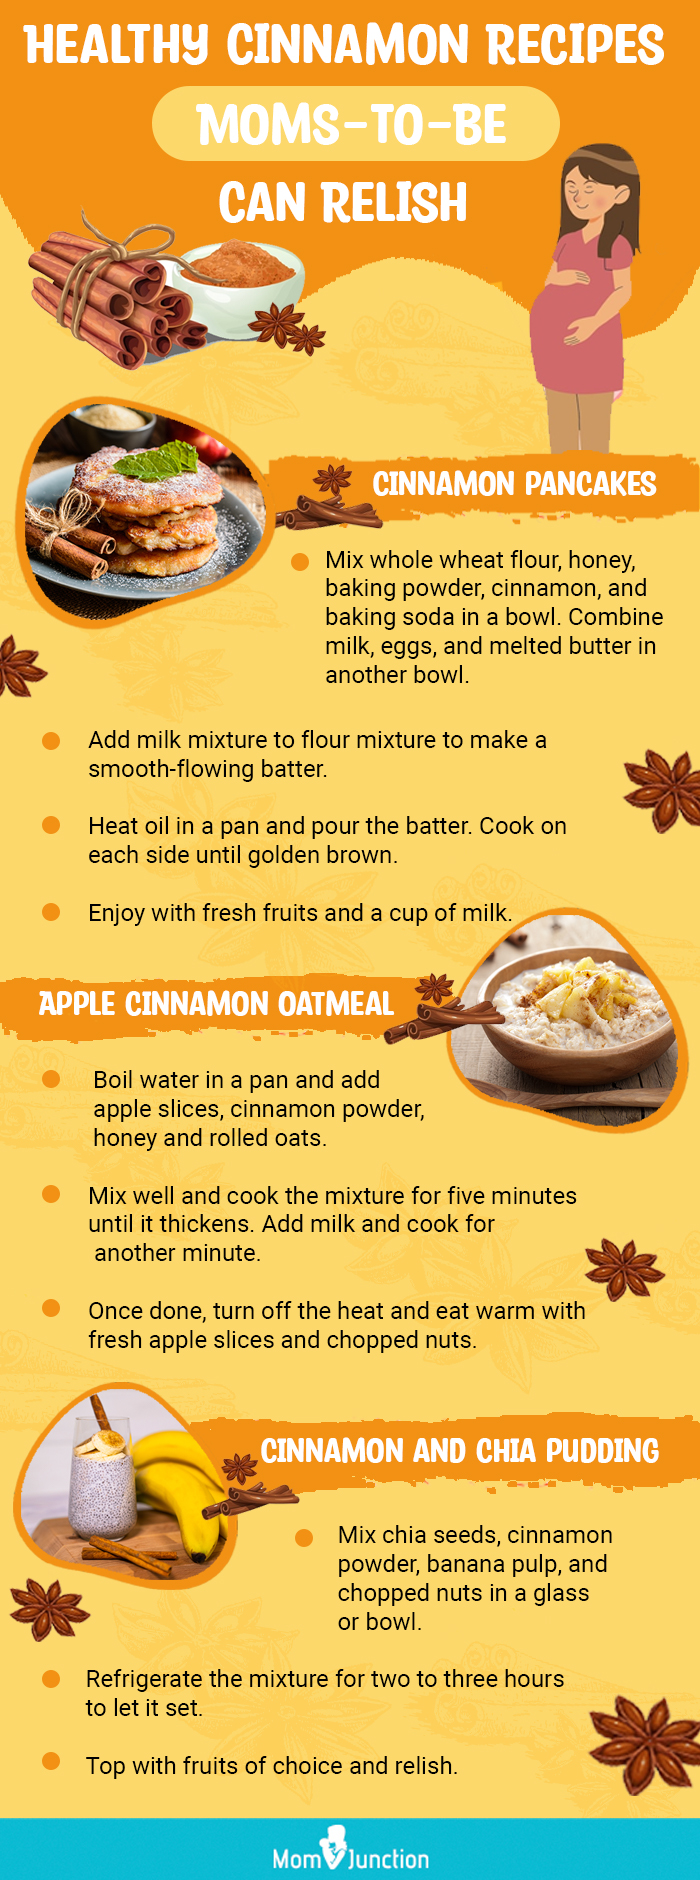 healthy cinnamon recipes moms to be an relish (infographic)